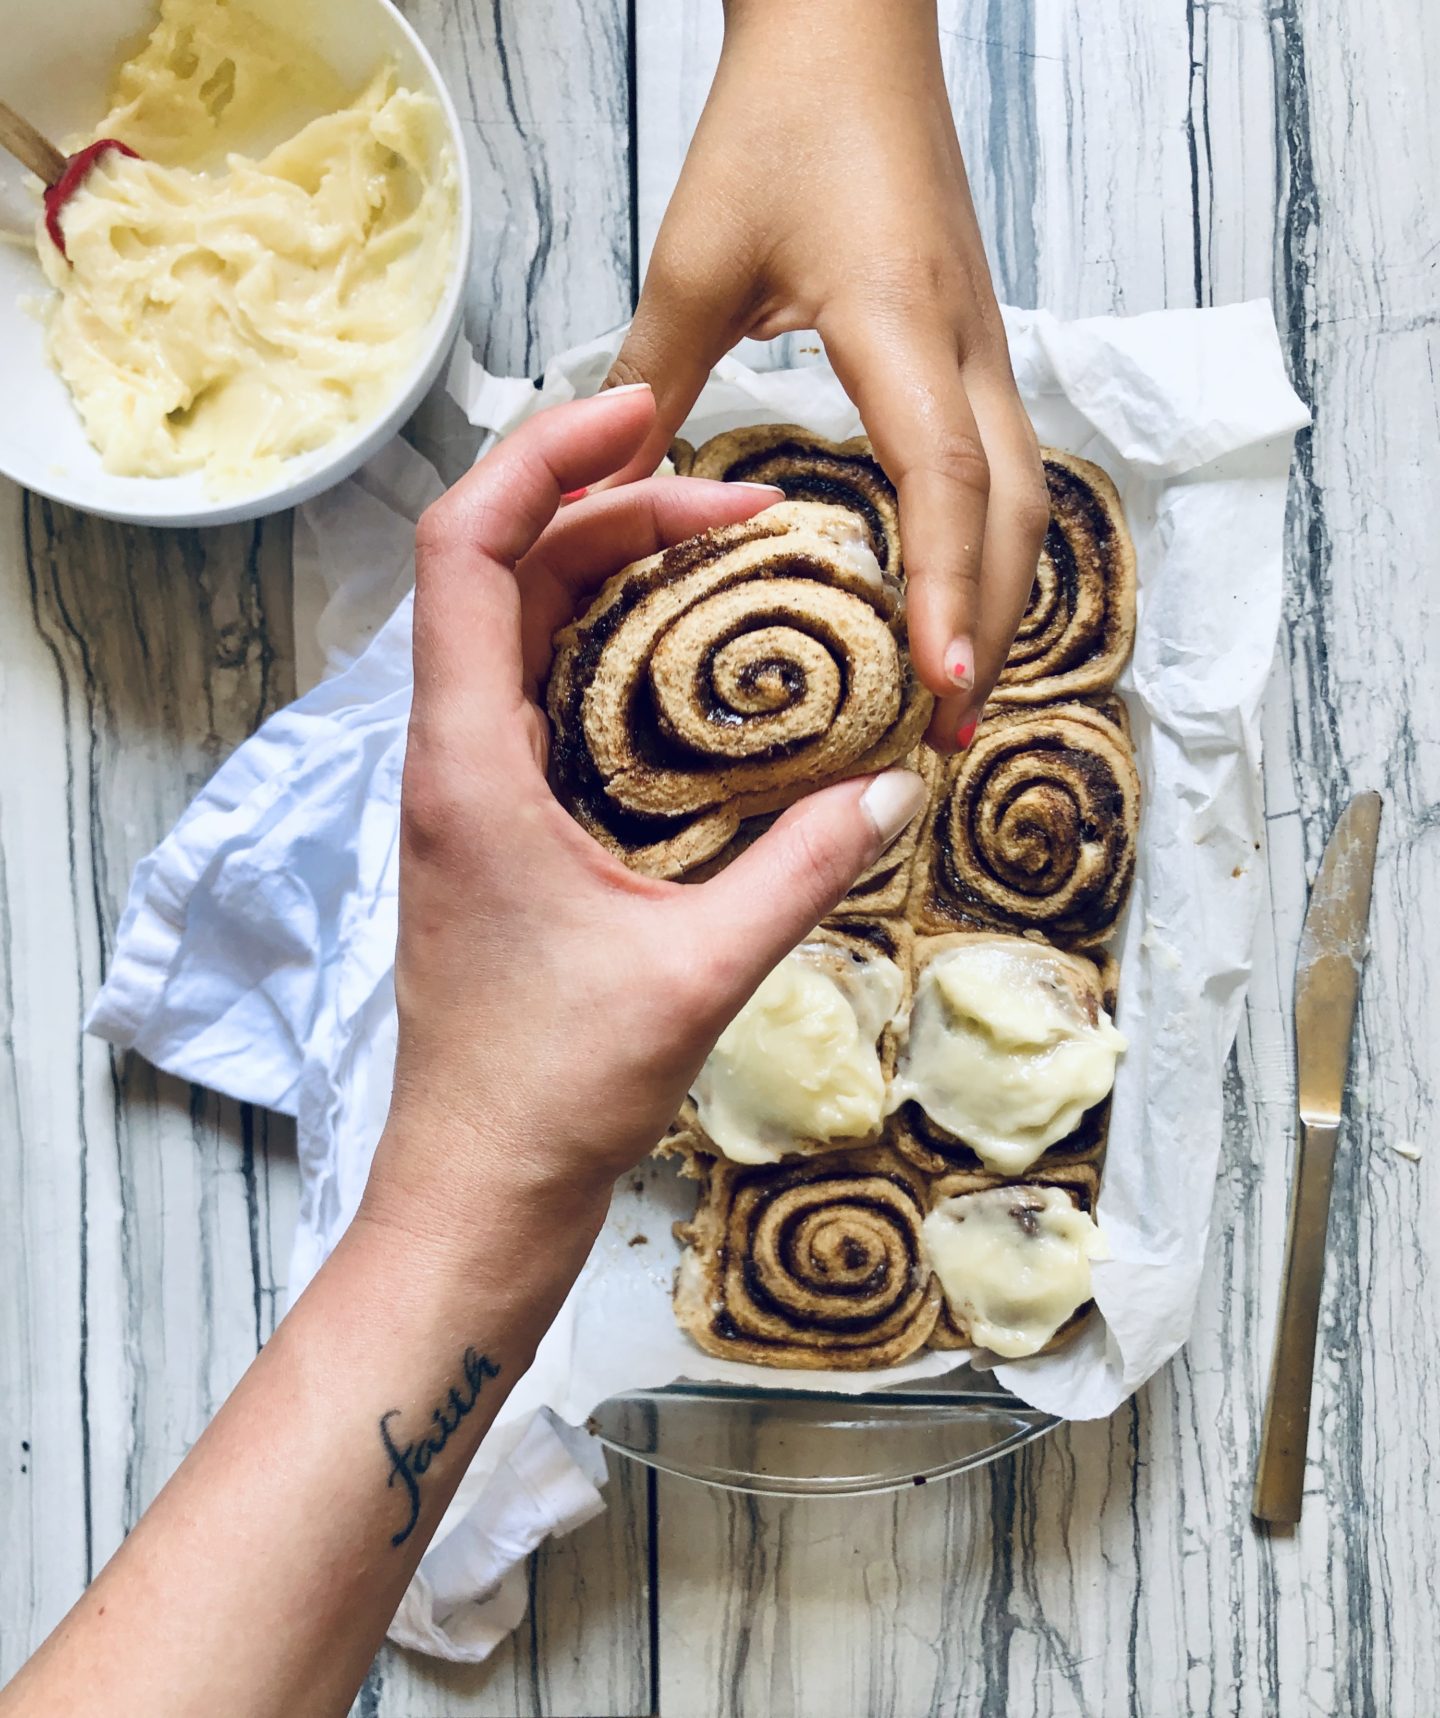 Lifestyle Blogger Chocolate & Lace shares her recipe for Cream Cheese Frosted Cinnamon Rolls